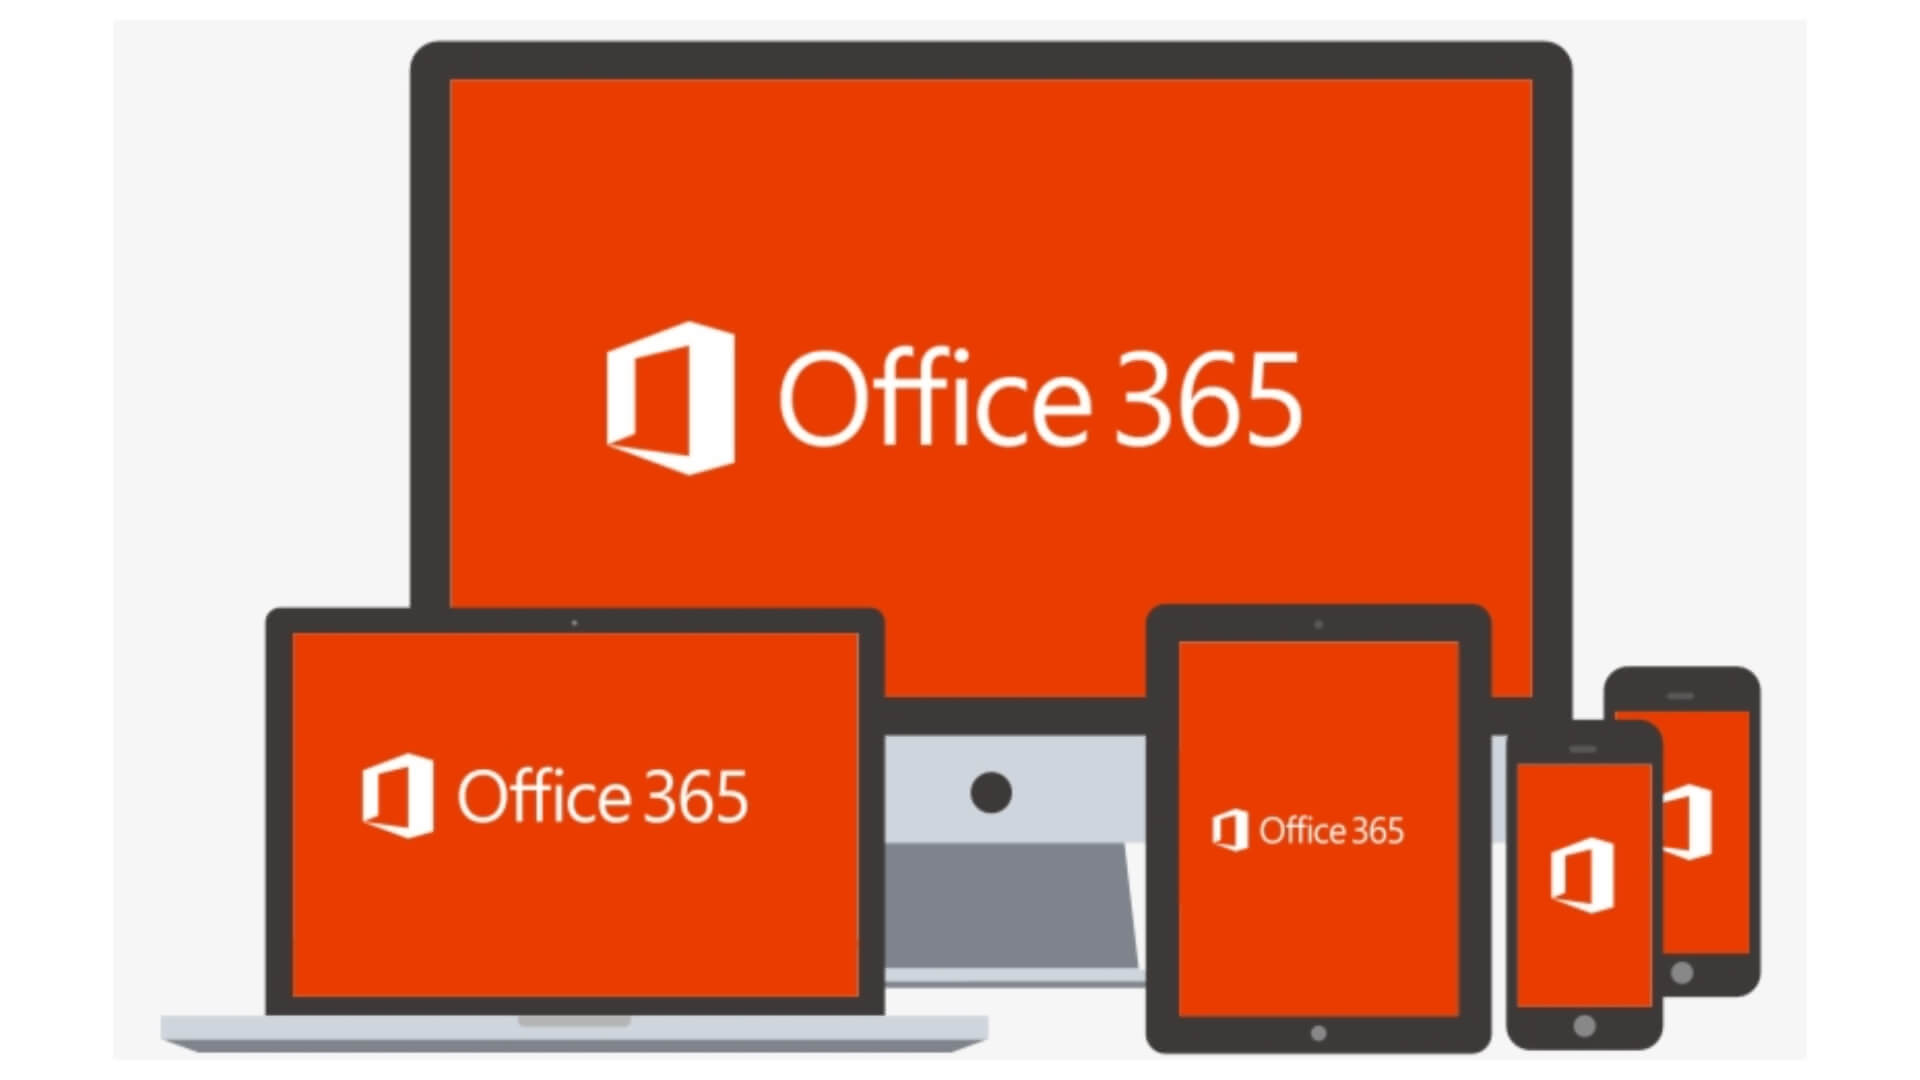 Security of Office 365